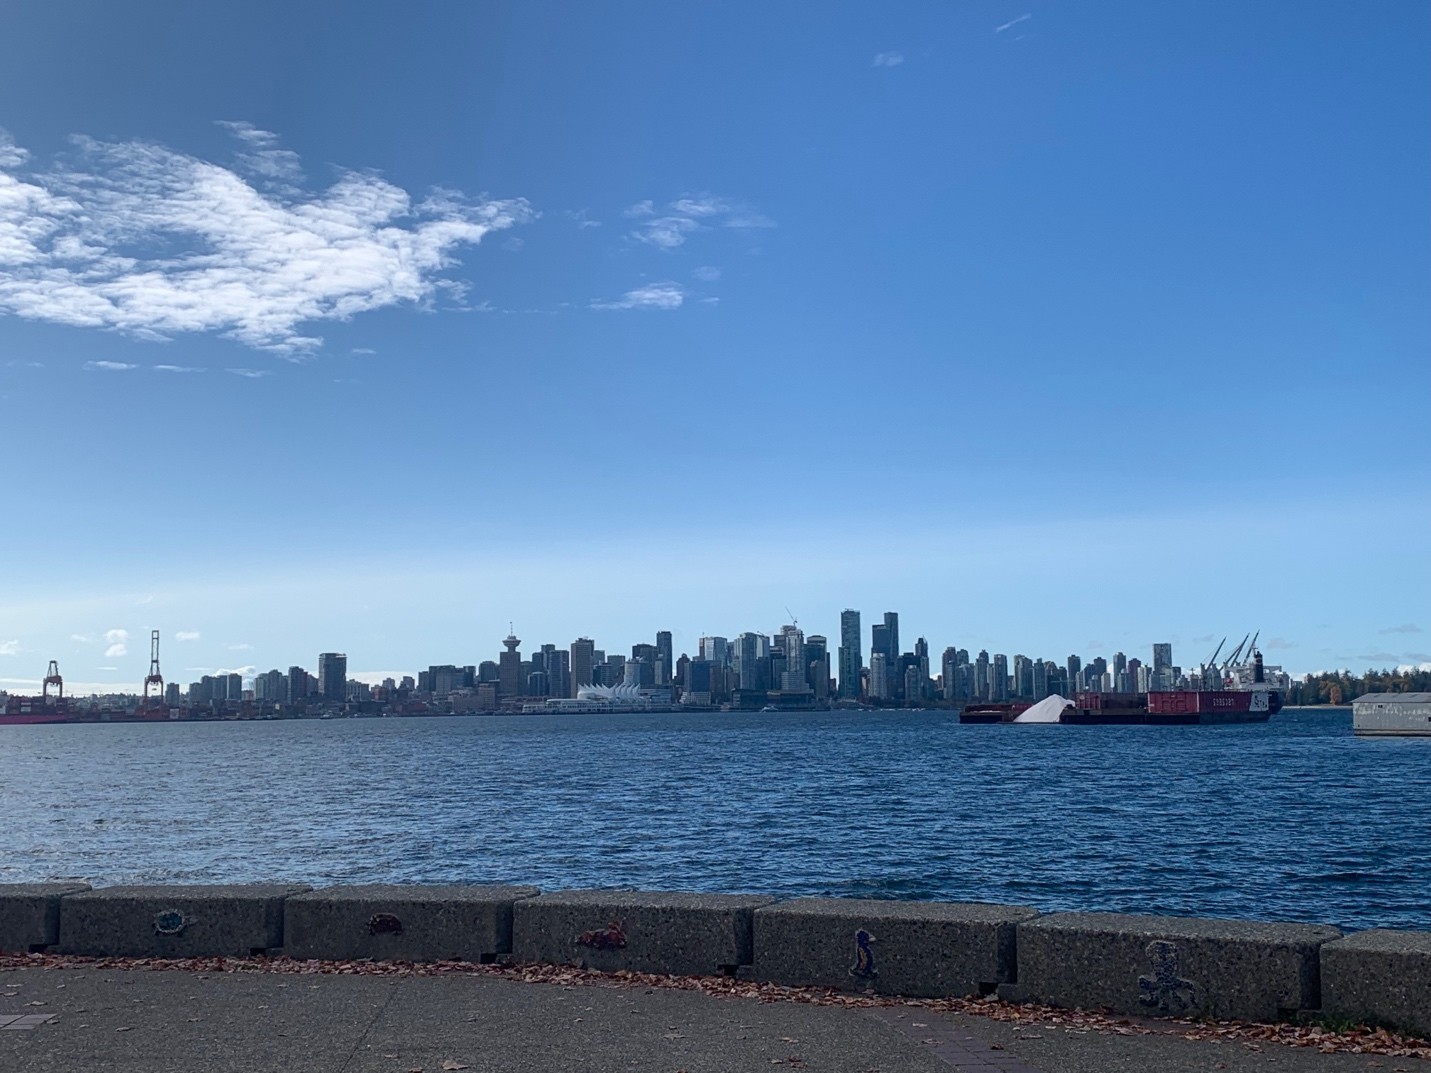 Image of the ocean with Vancouver buildings in the background